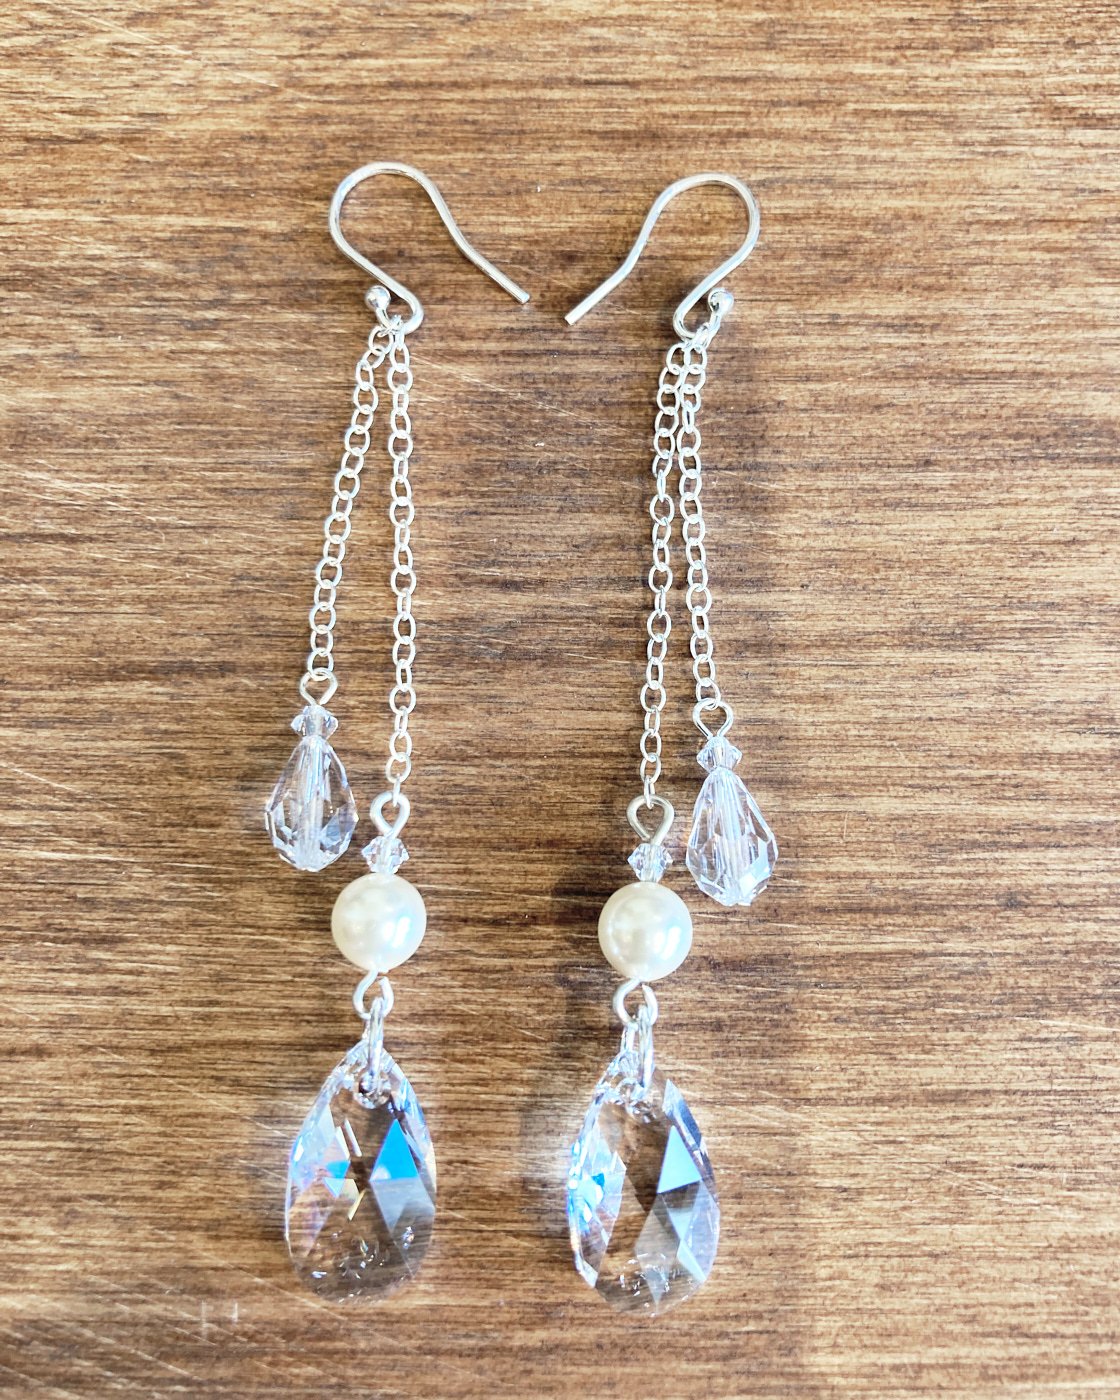 Small Light Blue Angelite and Crystal Beaded Natural Stone Dangle Drop Earrings Handmade Sterling Silver Boho Vintage Style Genuine Gemstone Jewelry for Women Gifts 